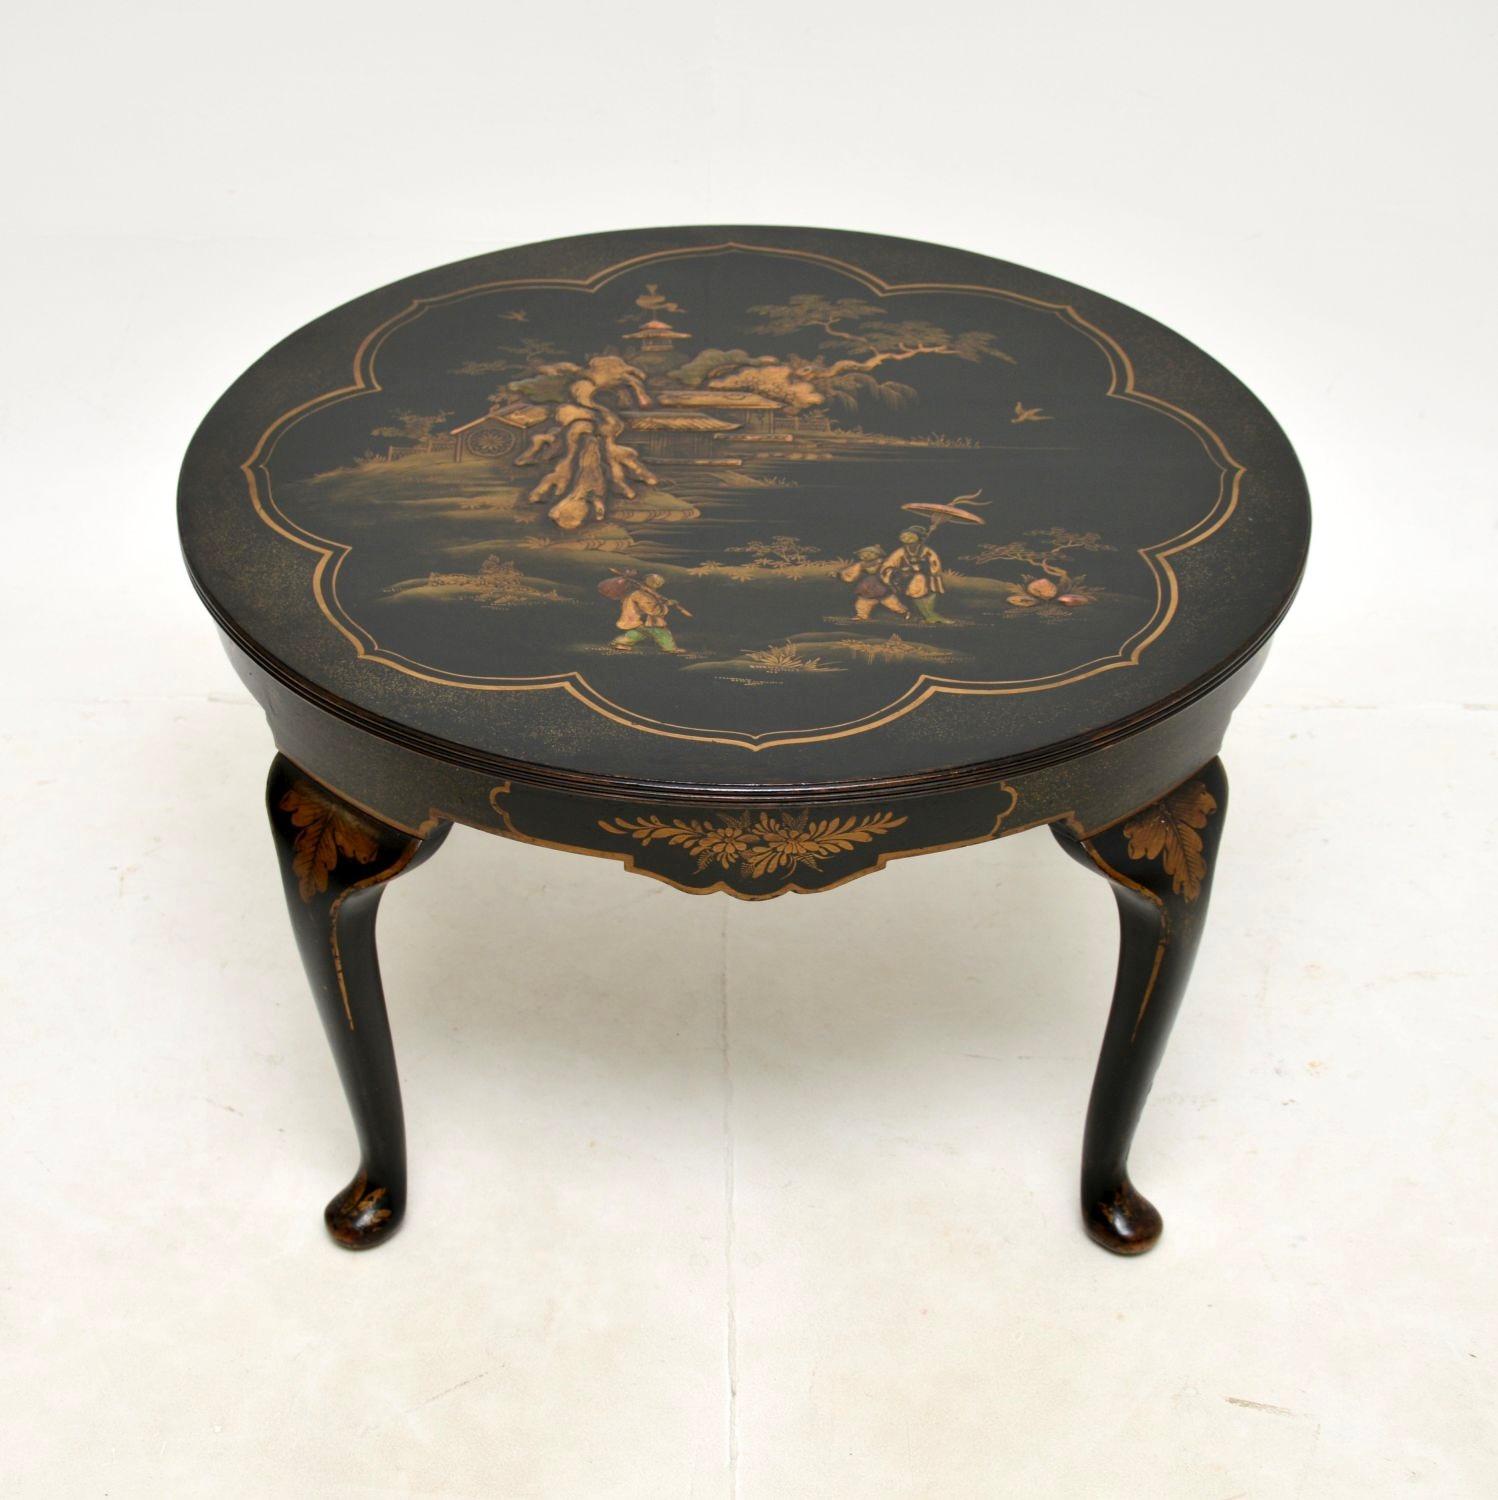 An absolutely stunning antique lacquered chinoiserie coffee table. This was made in England, it dates from around the 1920’s.

It is of extremely fine quality, with gorgeous lacquered decorations in the classic oriental style. It is a very useful